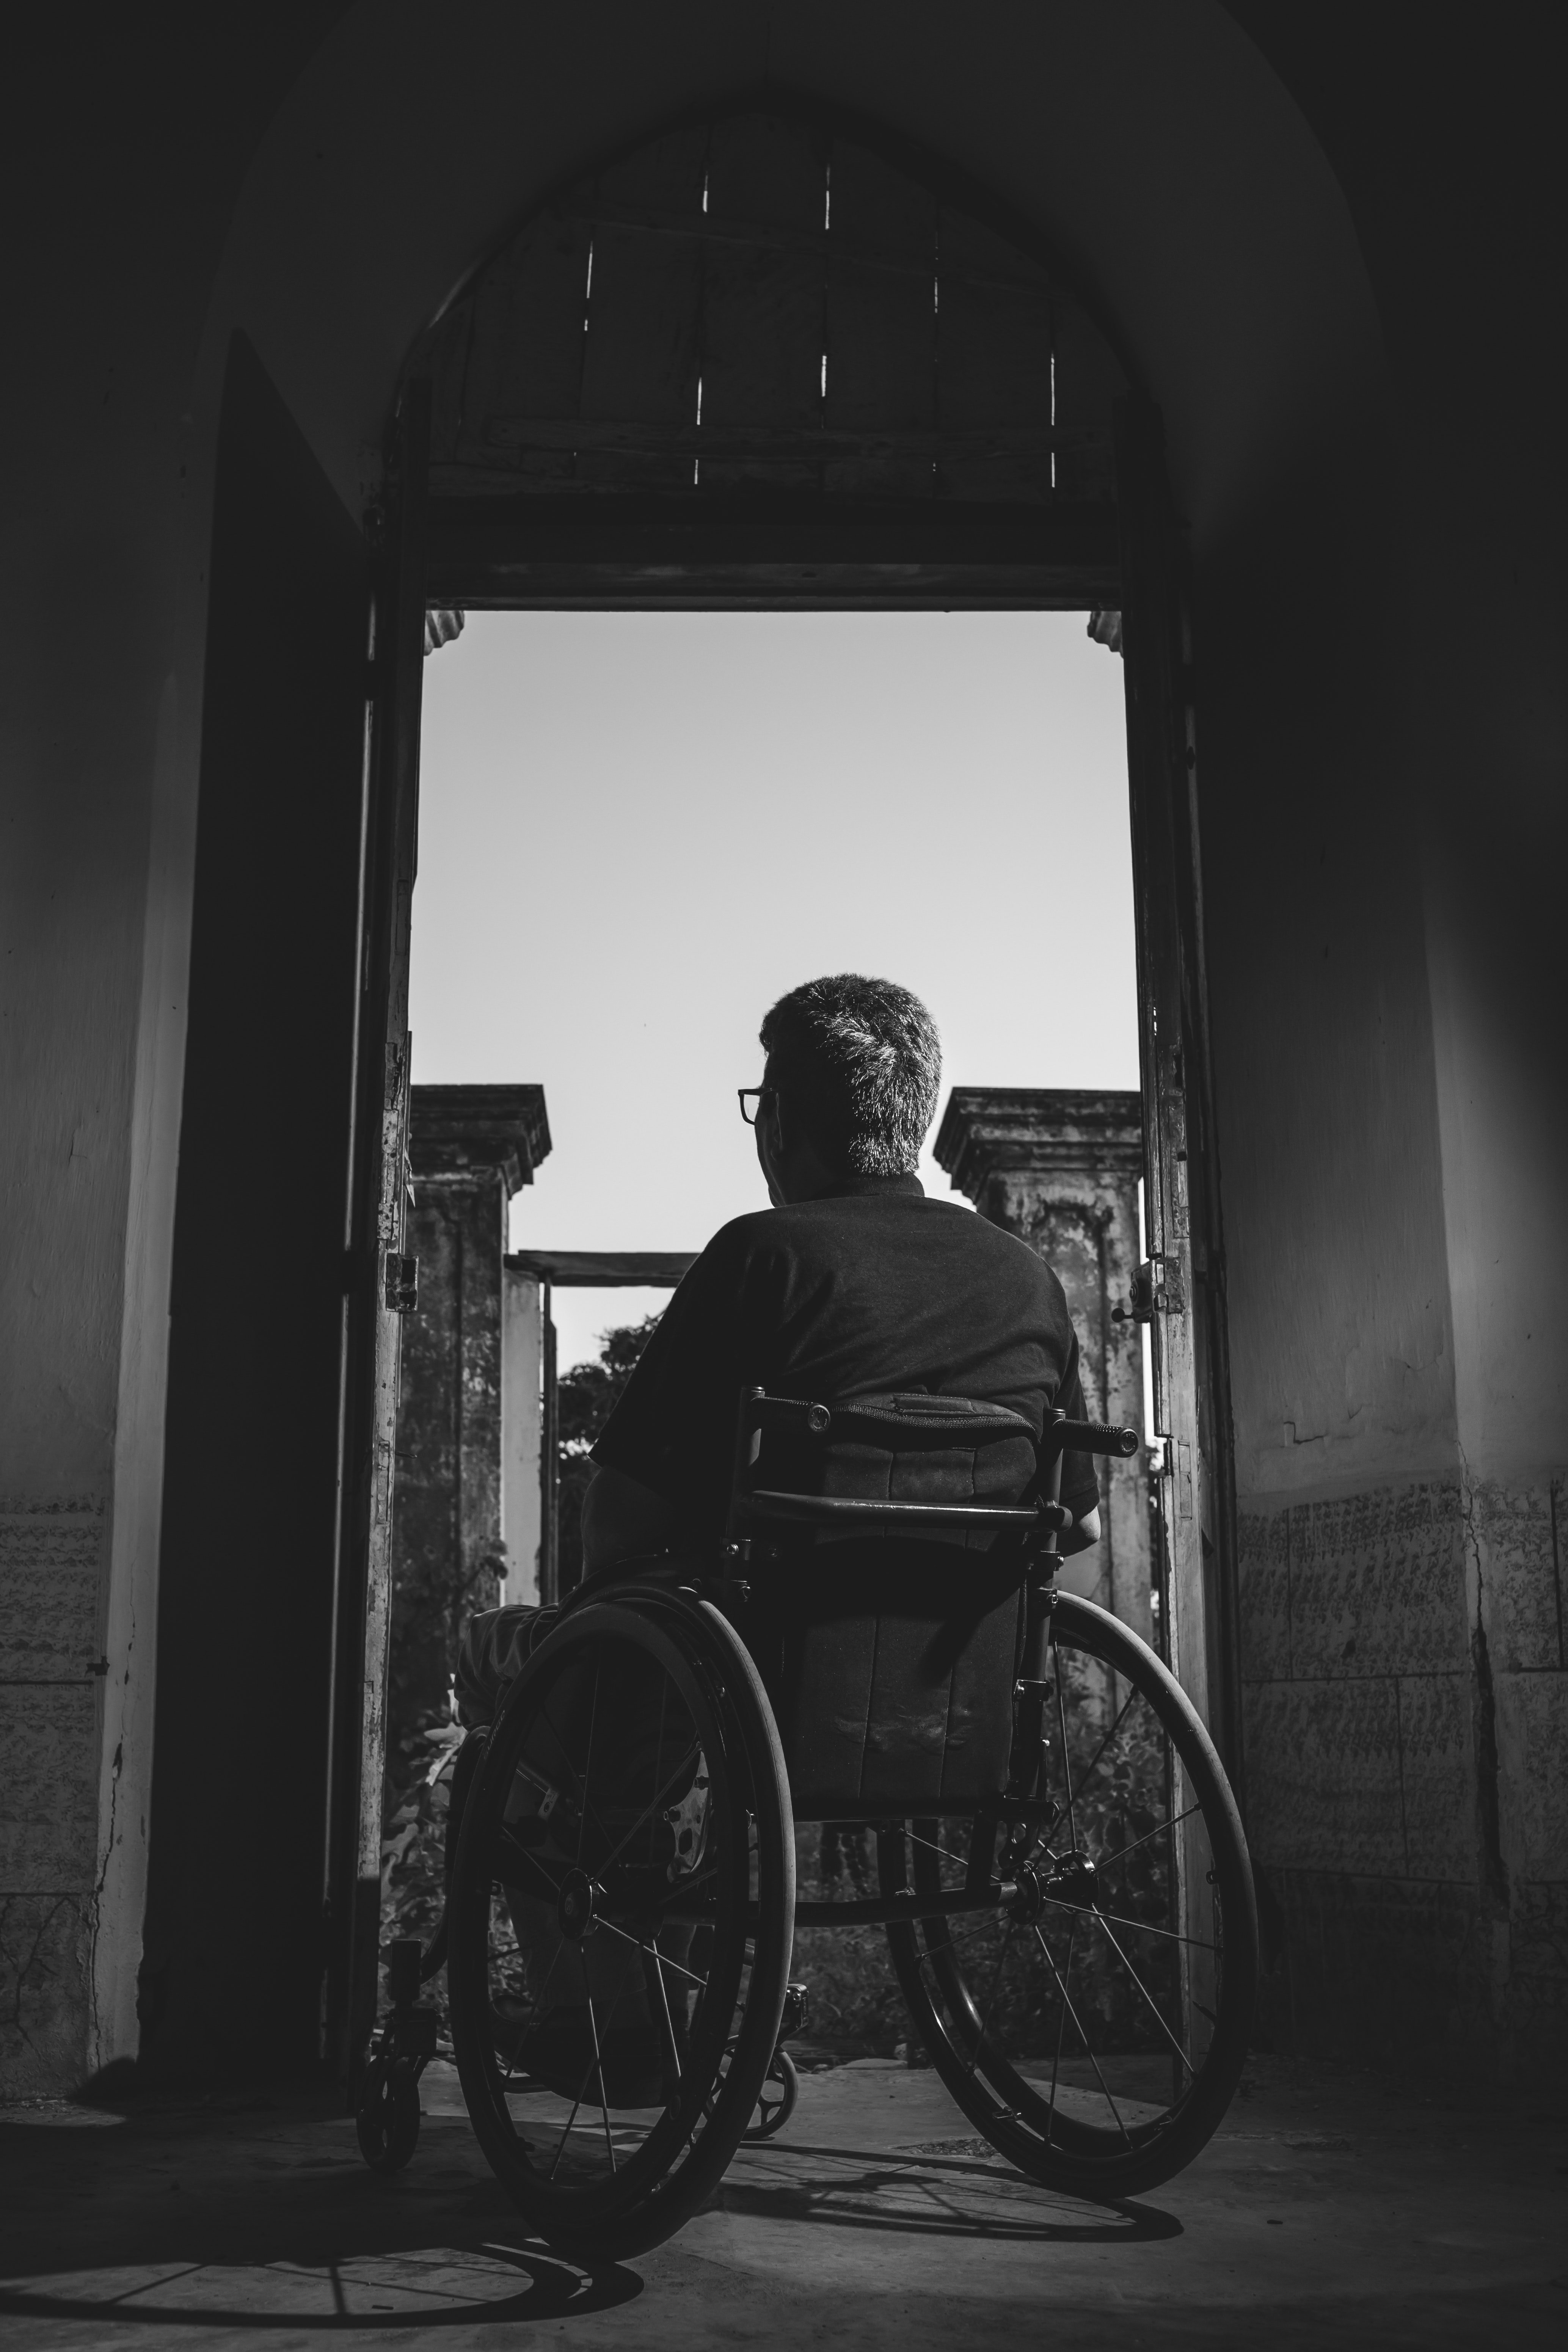 David was a successful businessman who had lost his ability to father children because of a spinal cord injury that rendered him paralyzed from the waist down | Source: Pexels